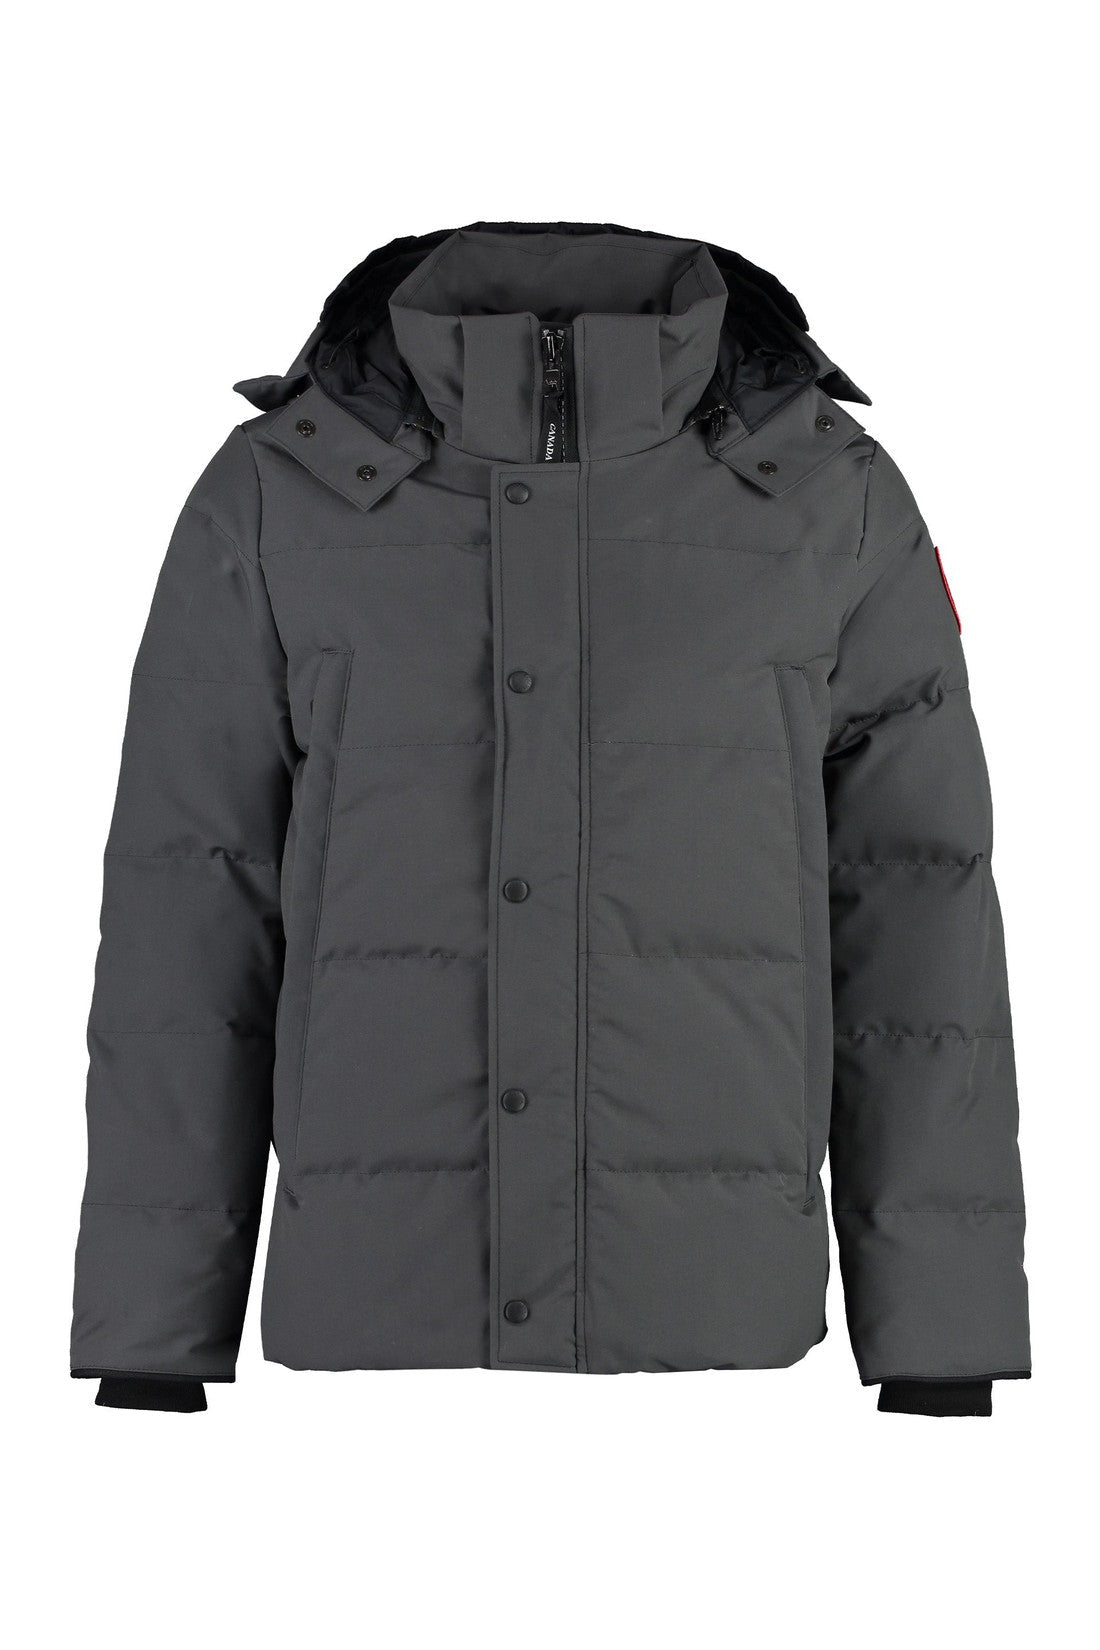 Canada Goose-OUTLET-SALE-Wyndham hooded down jacket-ARCHIVIST